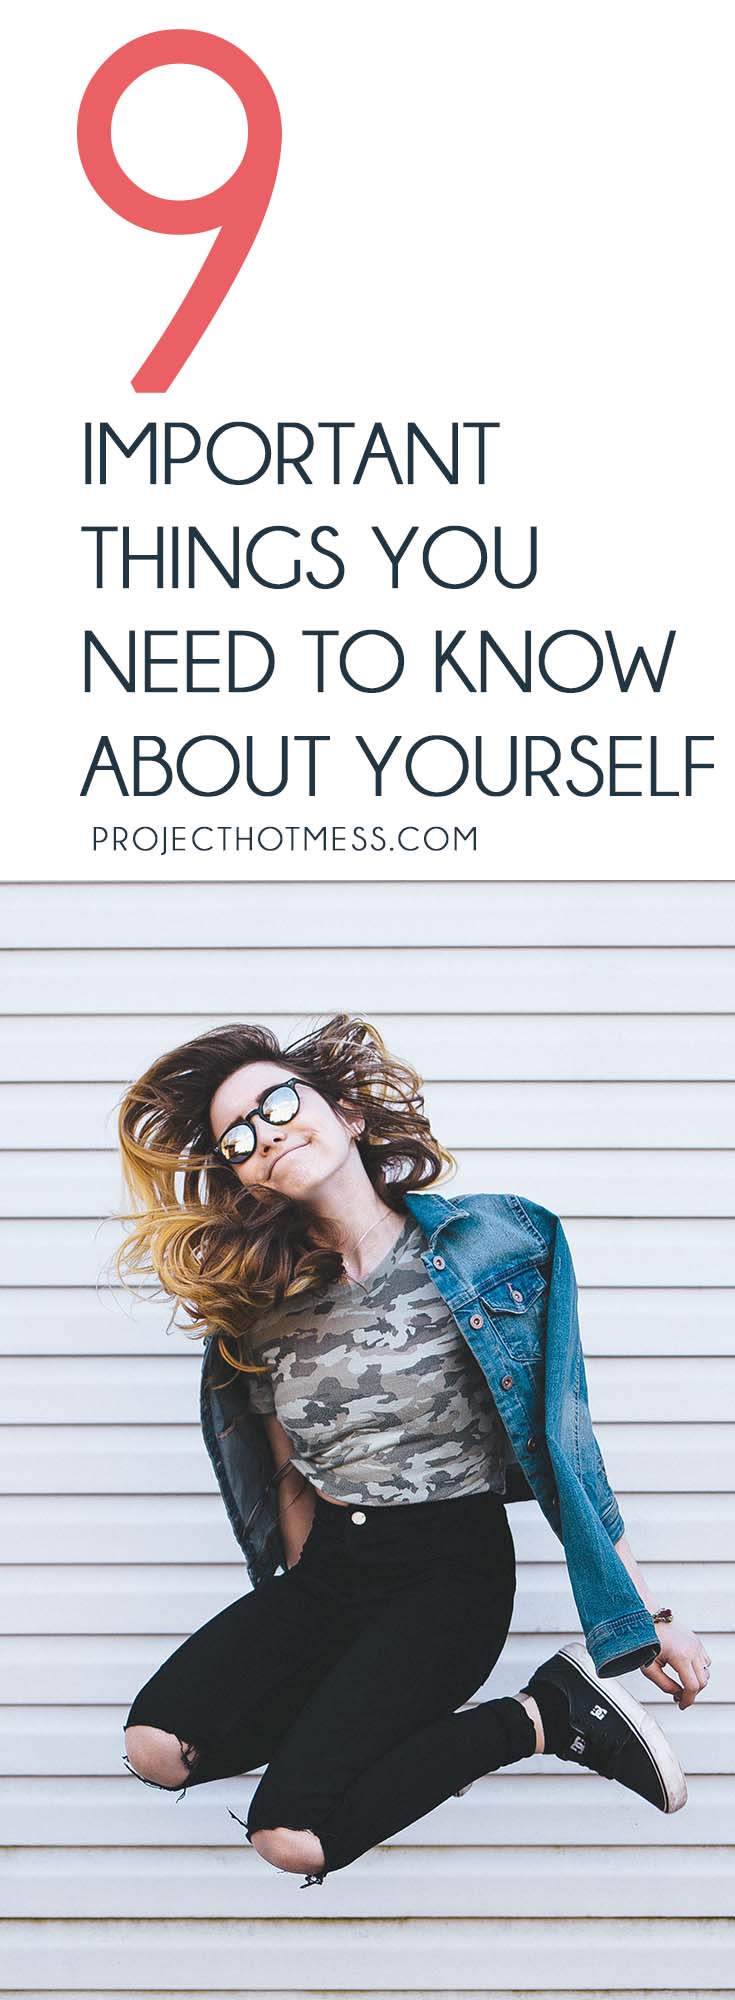 There are important things you need to know about yourself that can help you understand who you are, why you are the way you are and how to be even happier. Confidence | Self Confidence | Self Esteem | Love Yourself | Confidence Building | Confident Woman | Confidence In Yourself | Confident | Self Reflection | Personality | Personality Tests | Know Yourself